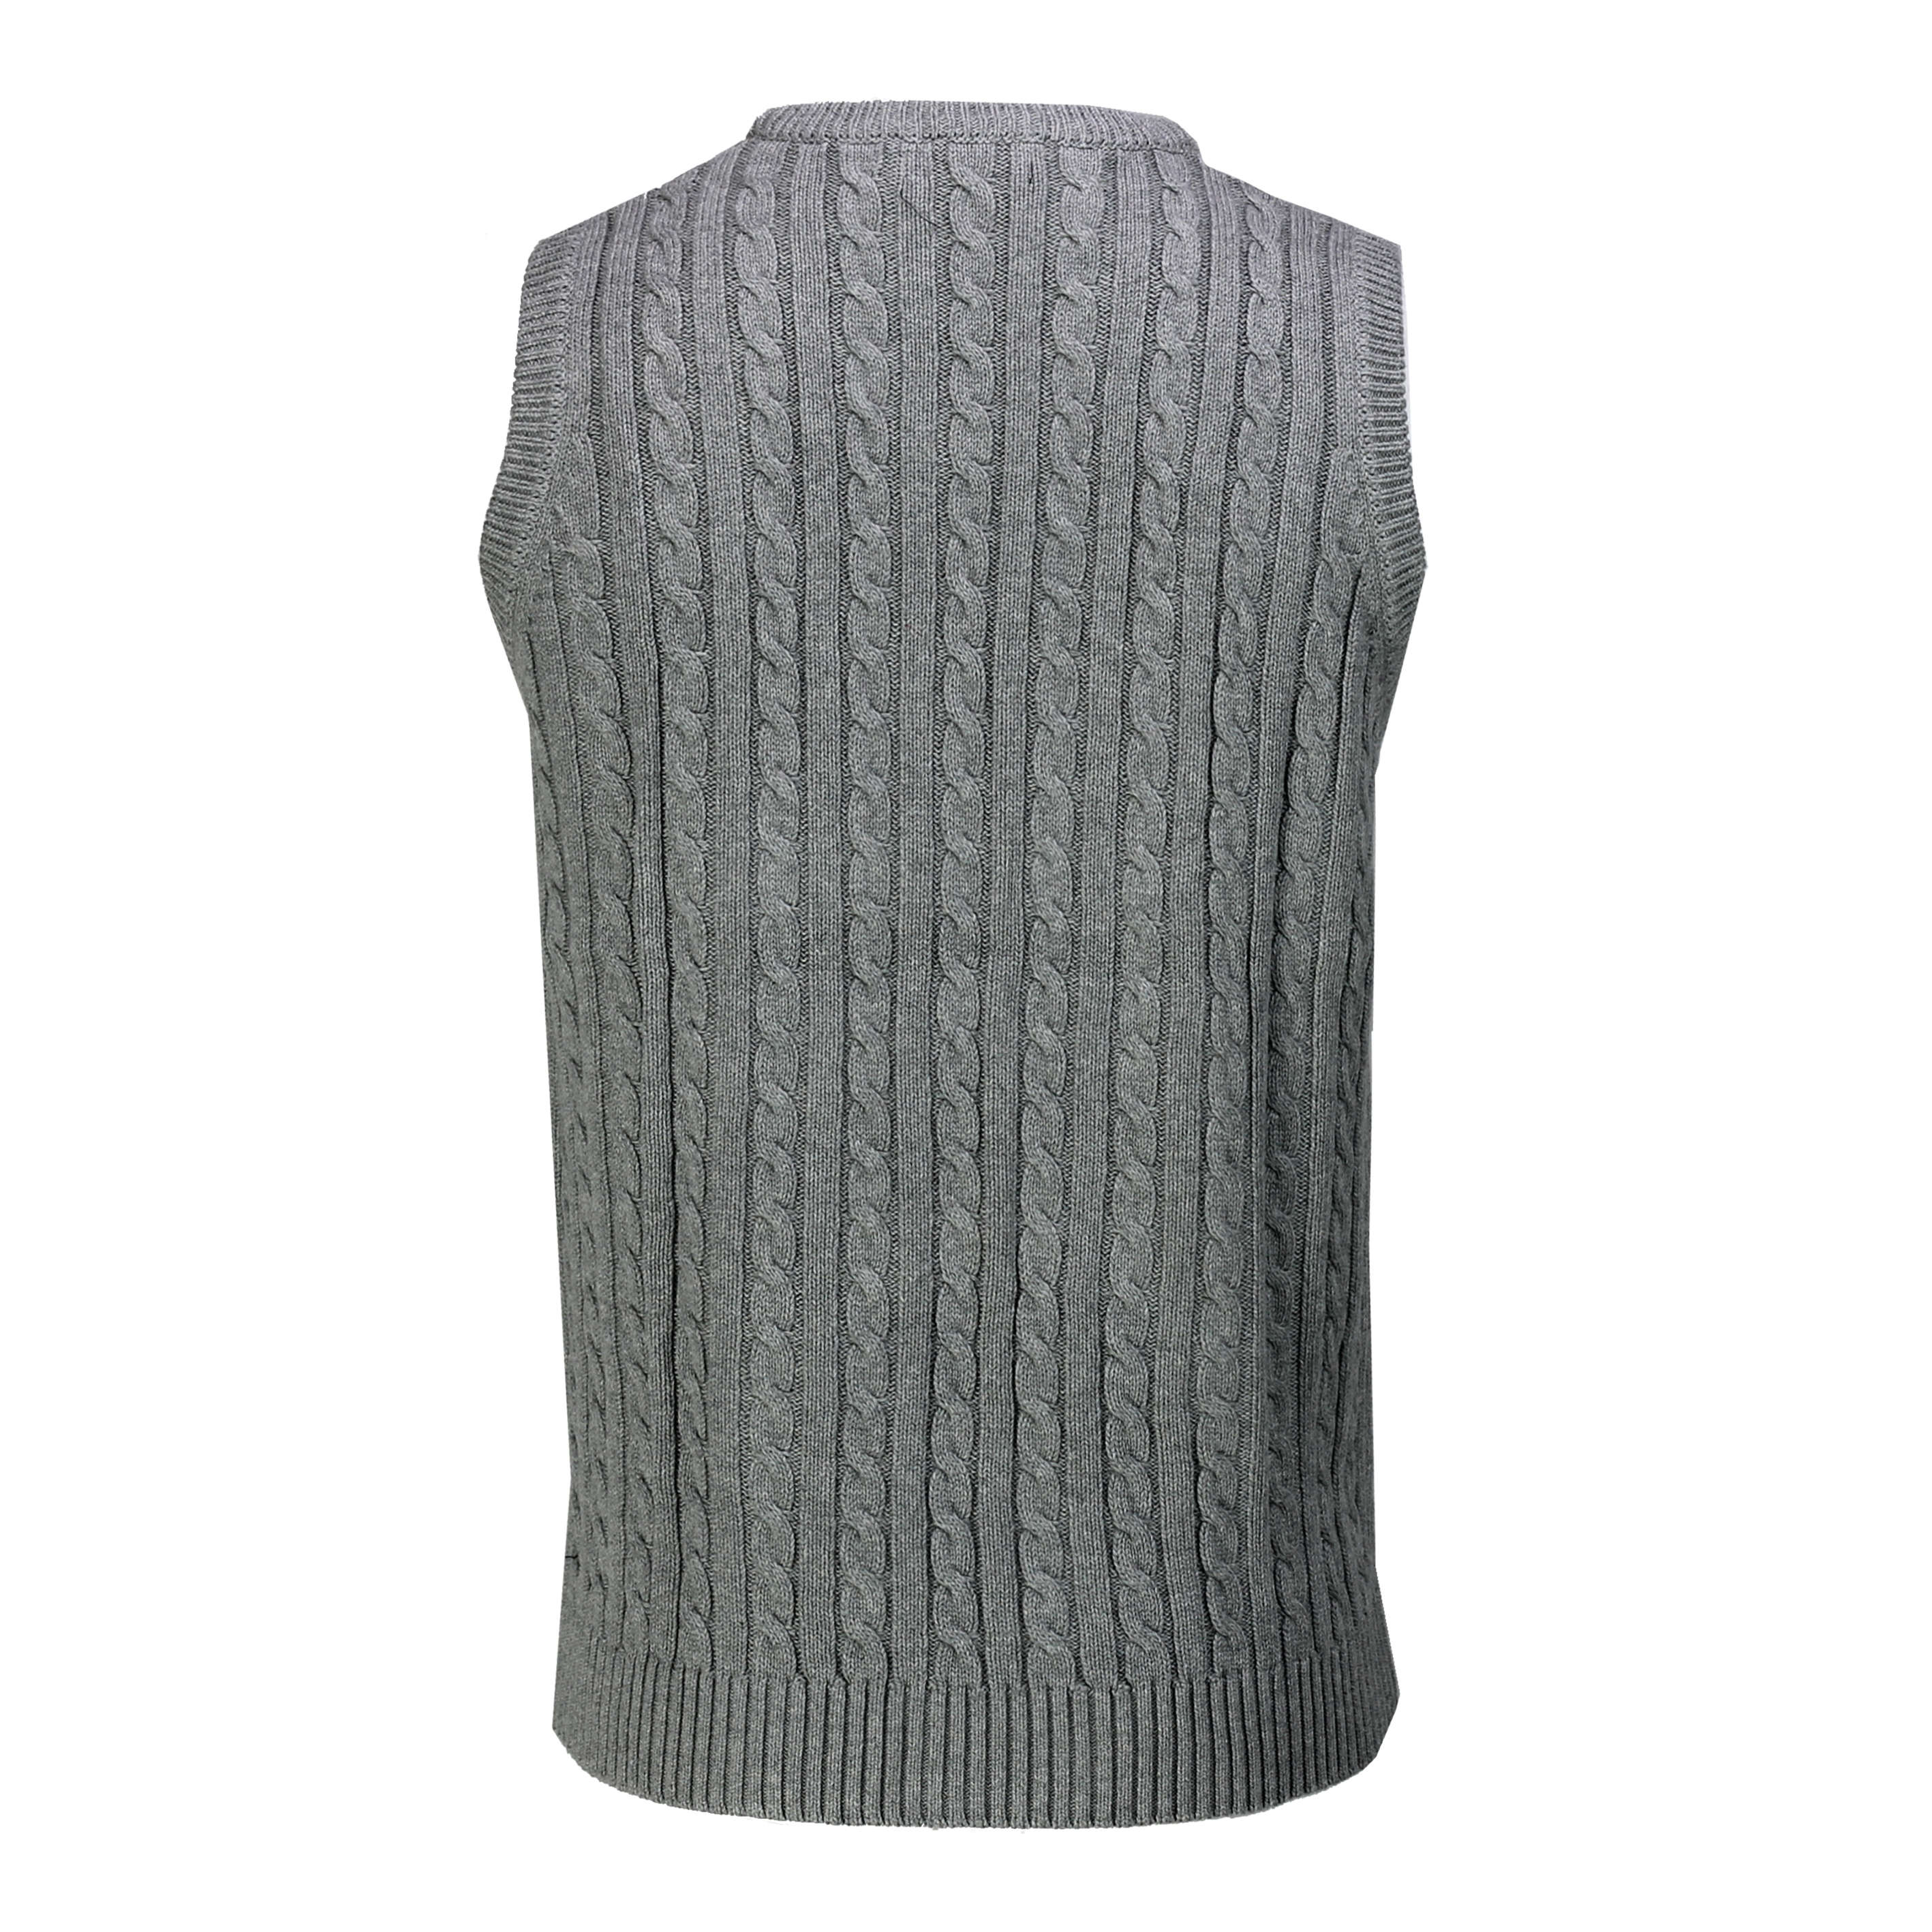 Mens Classic Cable Knitted Sleeveless V Neck Jumper Smart Casual ...